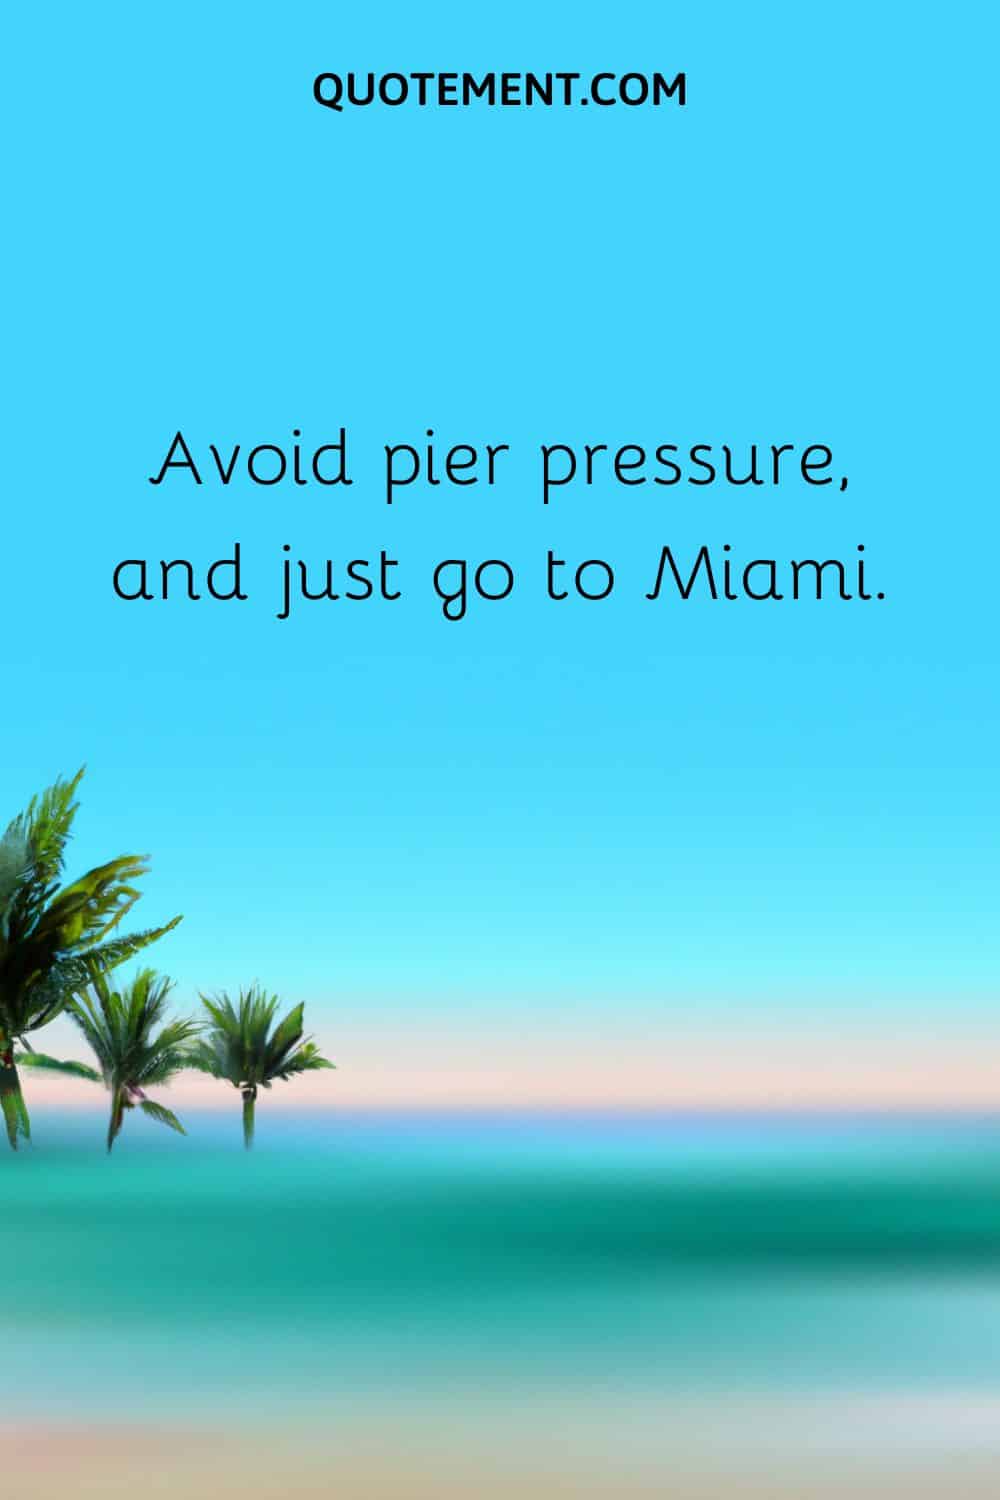 Avoid pier pressure, and just go to Miami